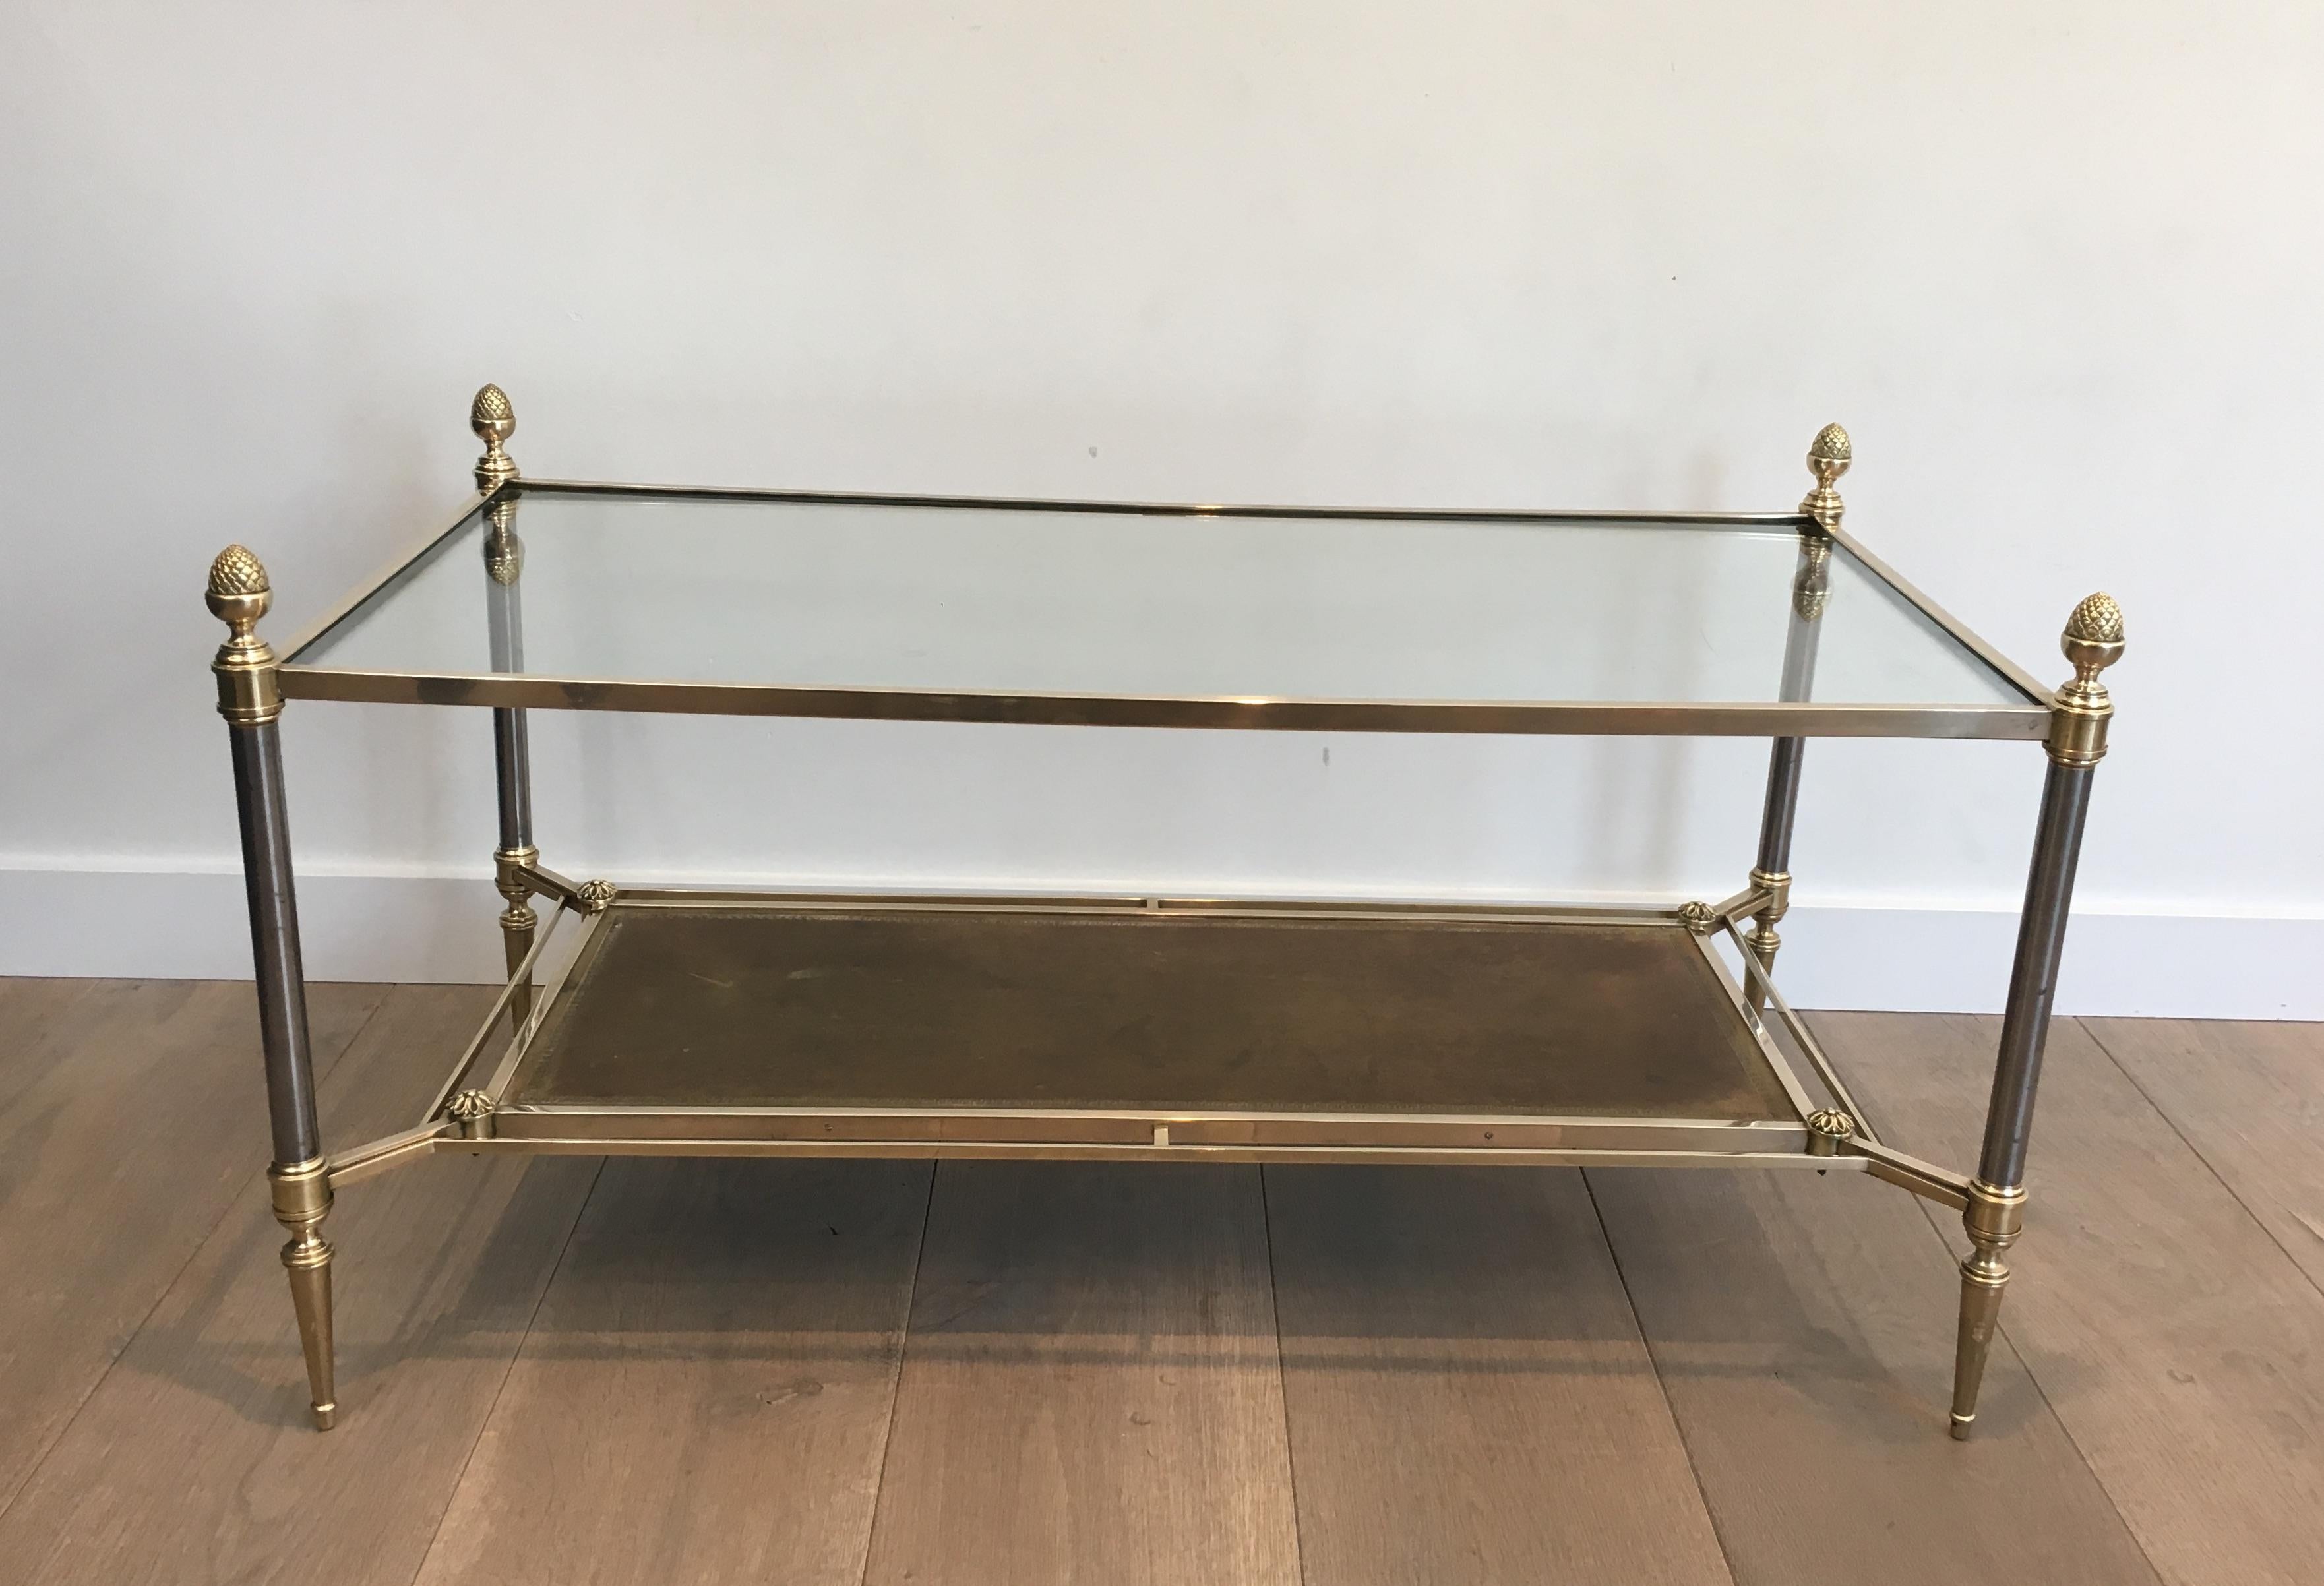 This neoclassical coffee table is made of brass and brushed steel with glass on top shelf and leather on bottom shelf. This is a very nice cocktail table of very good quality. This is a French work by famous designer Maison Jansen, circa 1970.